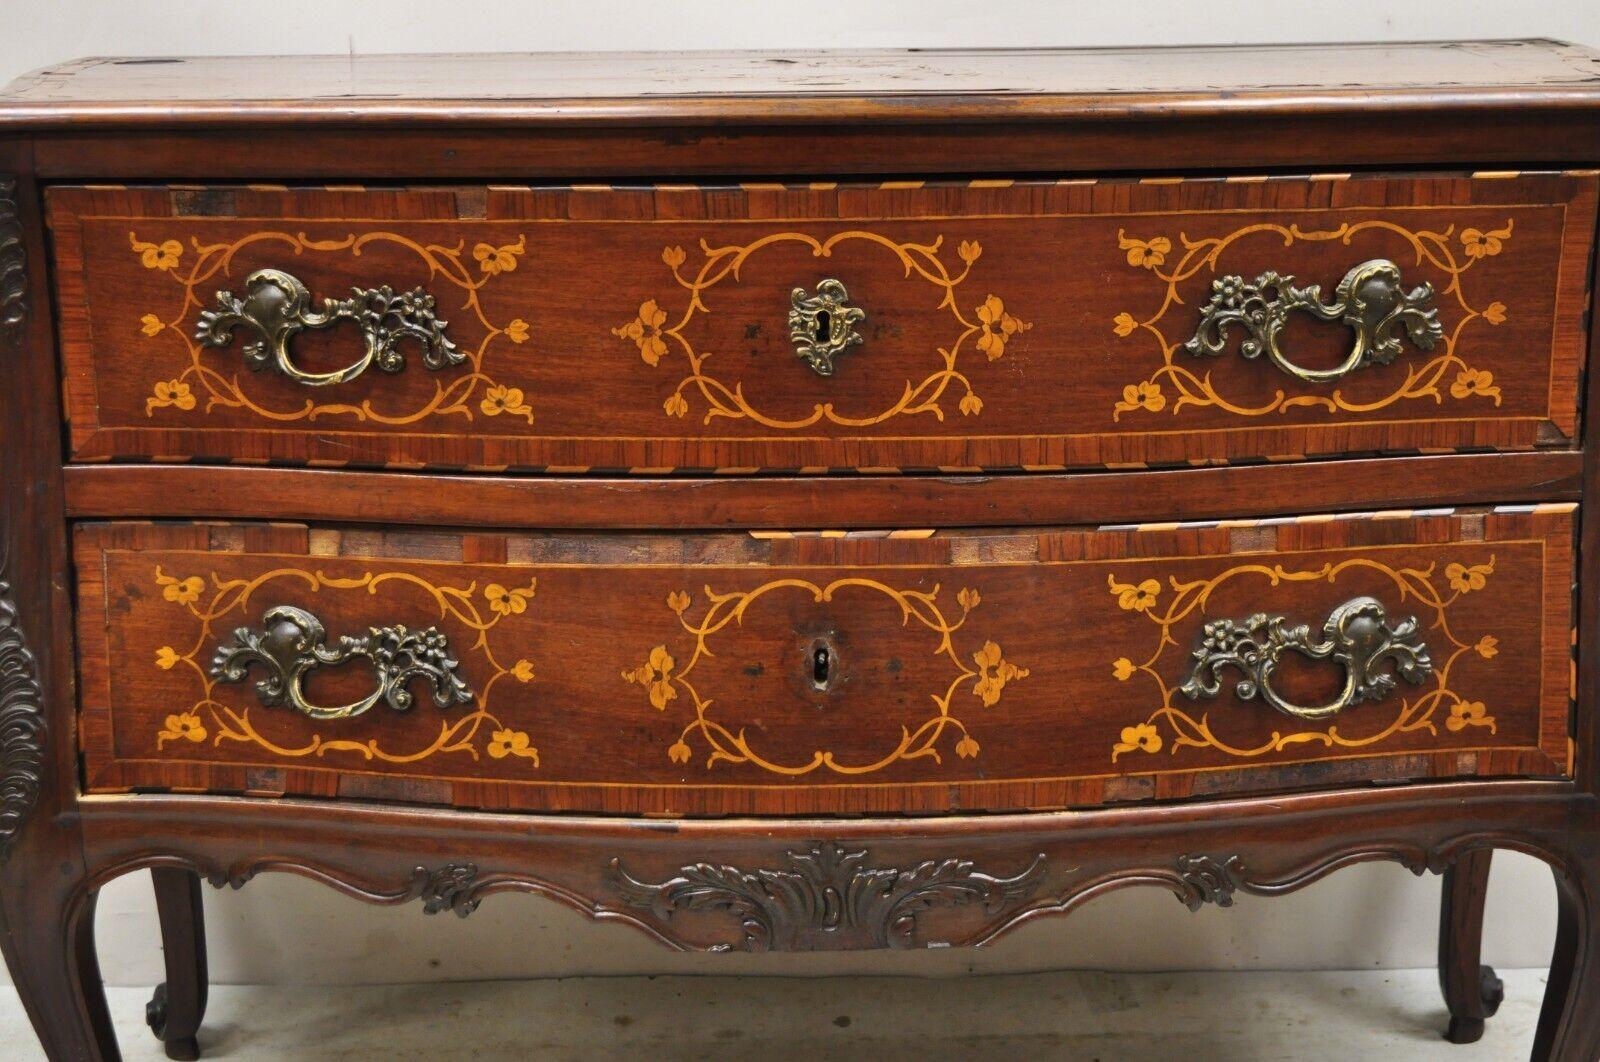 Antique French Louis XV Style Marquetry Inlay Bombe Commode Chest of Drawers. Item features marquetry inlay throughout (with numerous losses), shapely bombe form, ornate hardware (some missing), beautiful wood grain, nicely carved details, 2